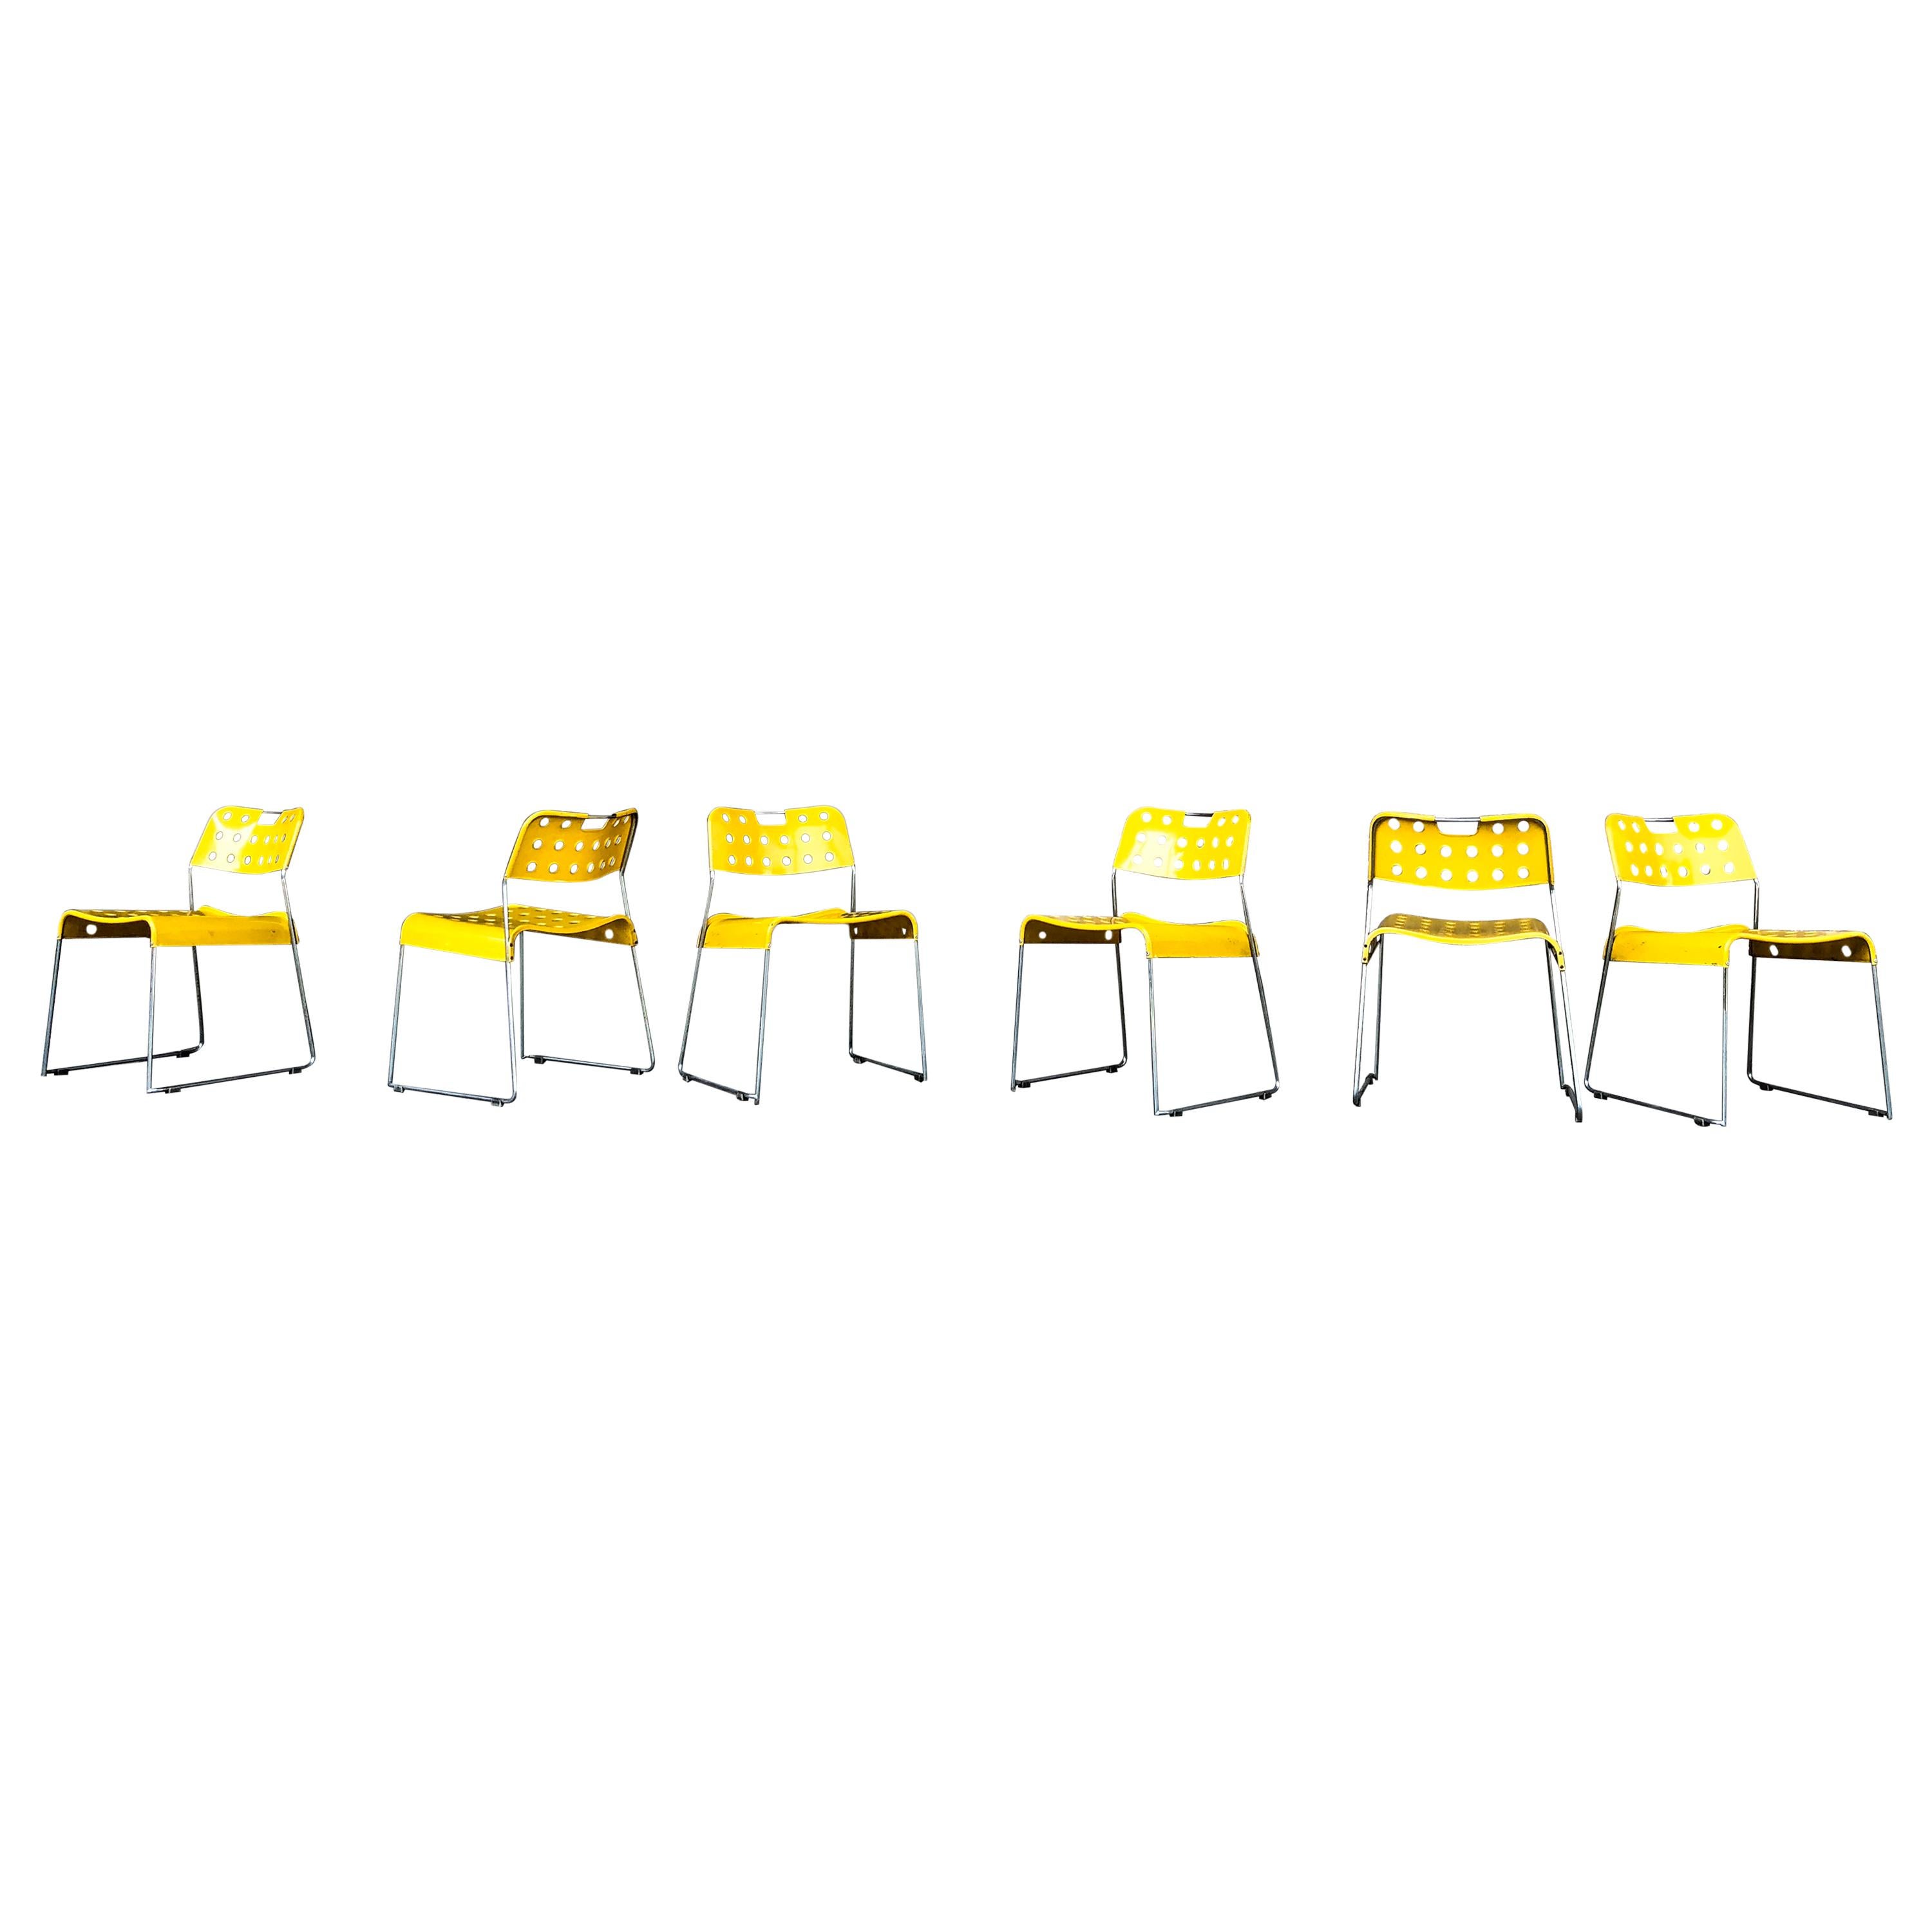 Rodney Kinsman Space Age Yellow Omstak Chair for Bieffeplast, 1971, Set of 12 For Sale 1